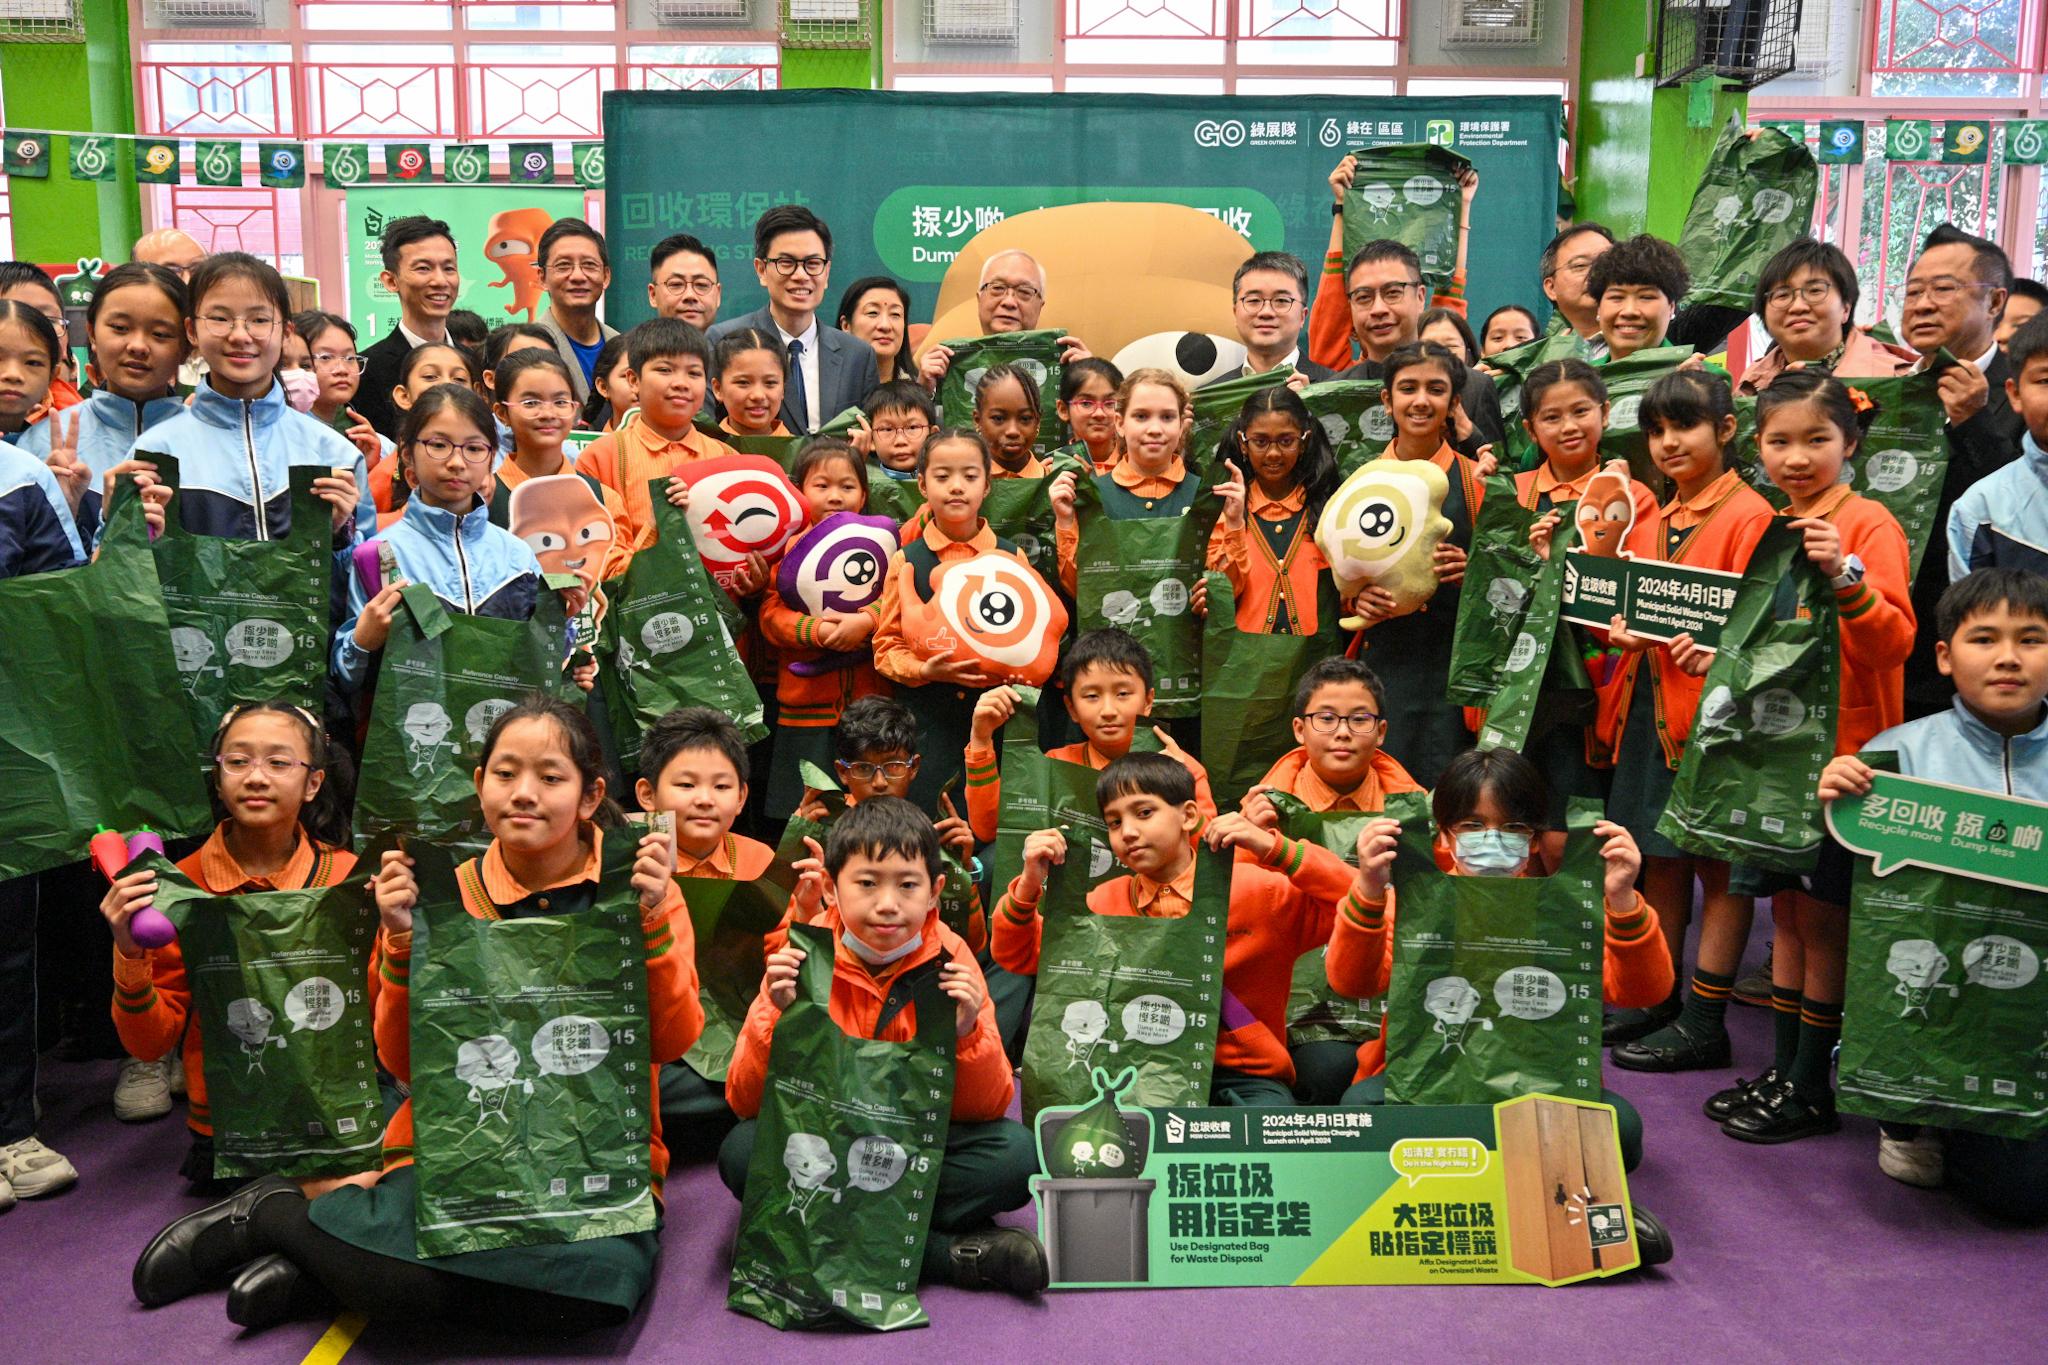 The Secretary for Environment and Ecology, Mr Tse Chin-wan, and the Under Secretary for Education, Mr Sze Chun-fai, today (January 16) visited the Yaumati Kaifong Association School to promote municipal solid waste charging to students. The Environmental Protection Department will gradually distribute a 15-litre pre-paid designated bag to each primary school student in Hong Kong.